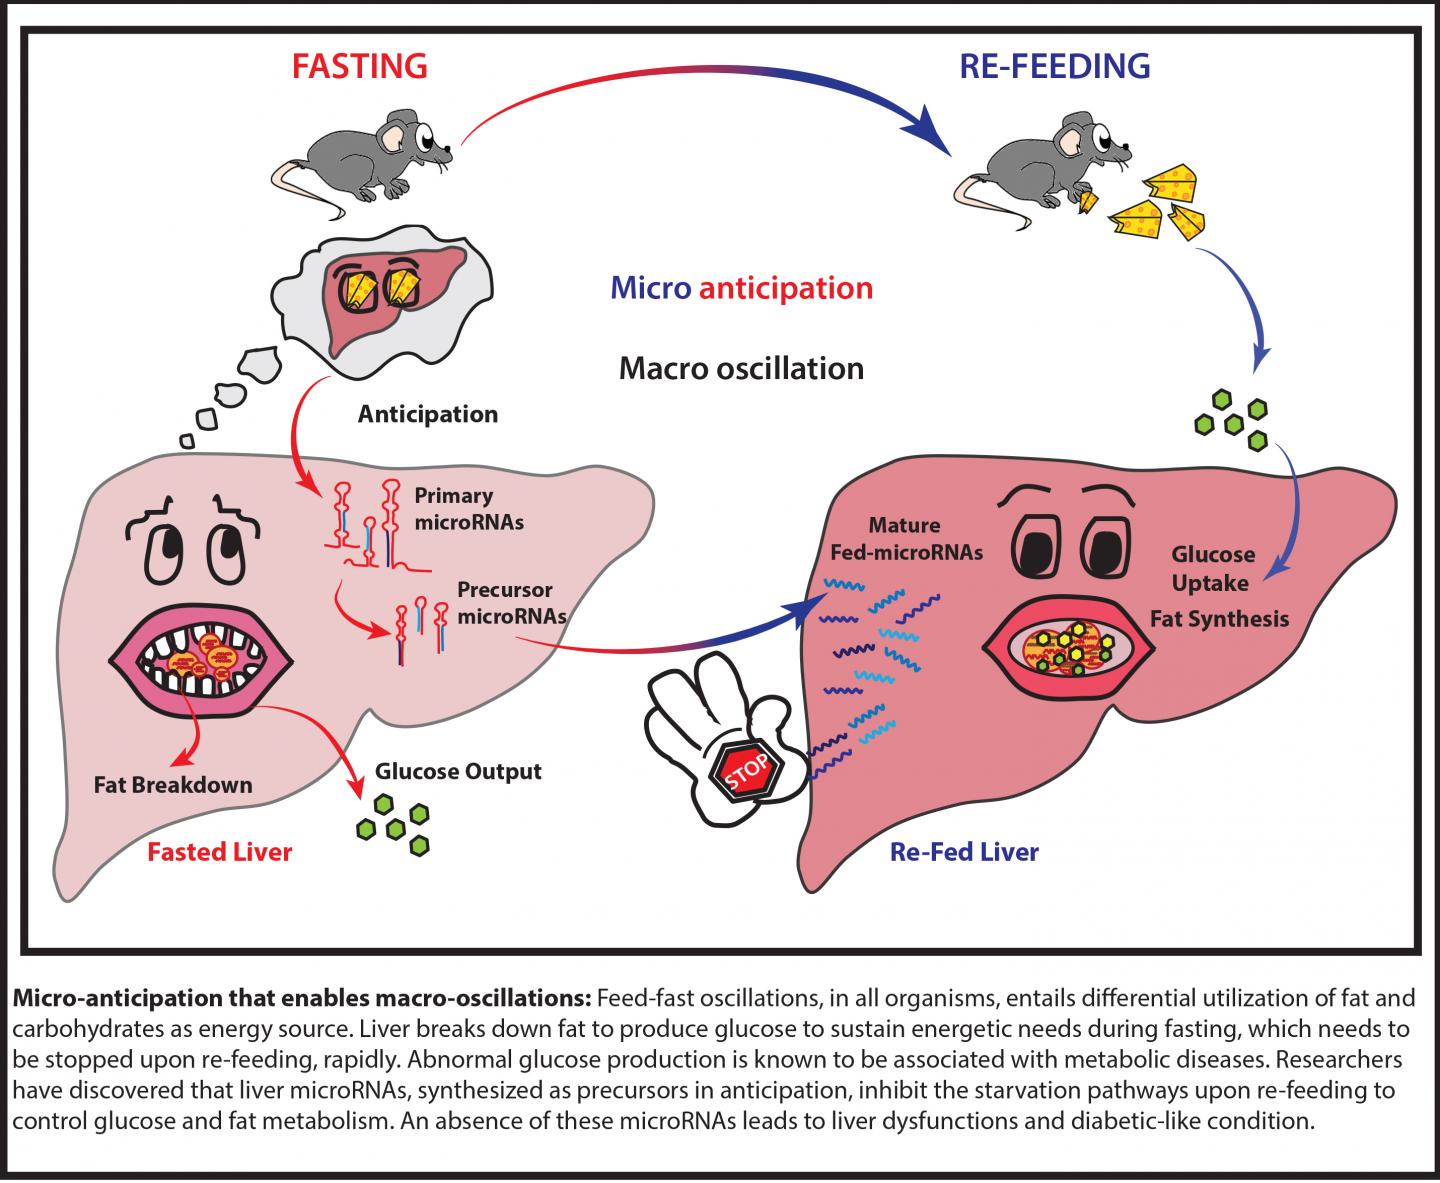 Energy metabolism and liver function